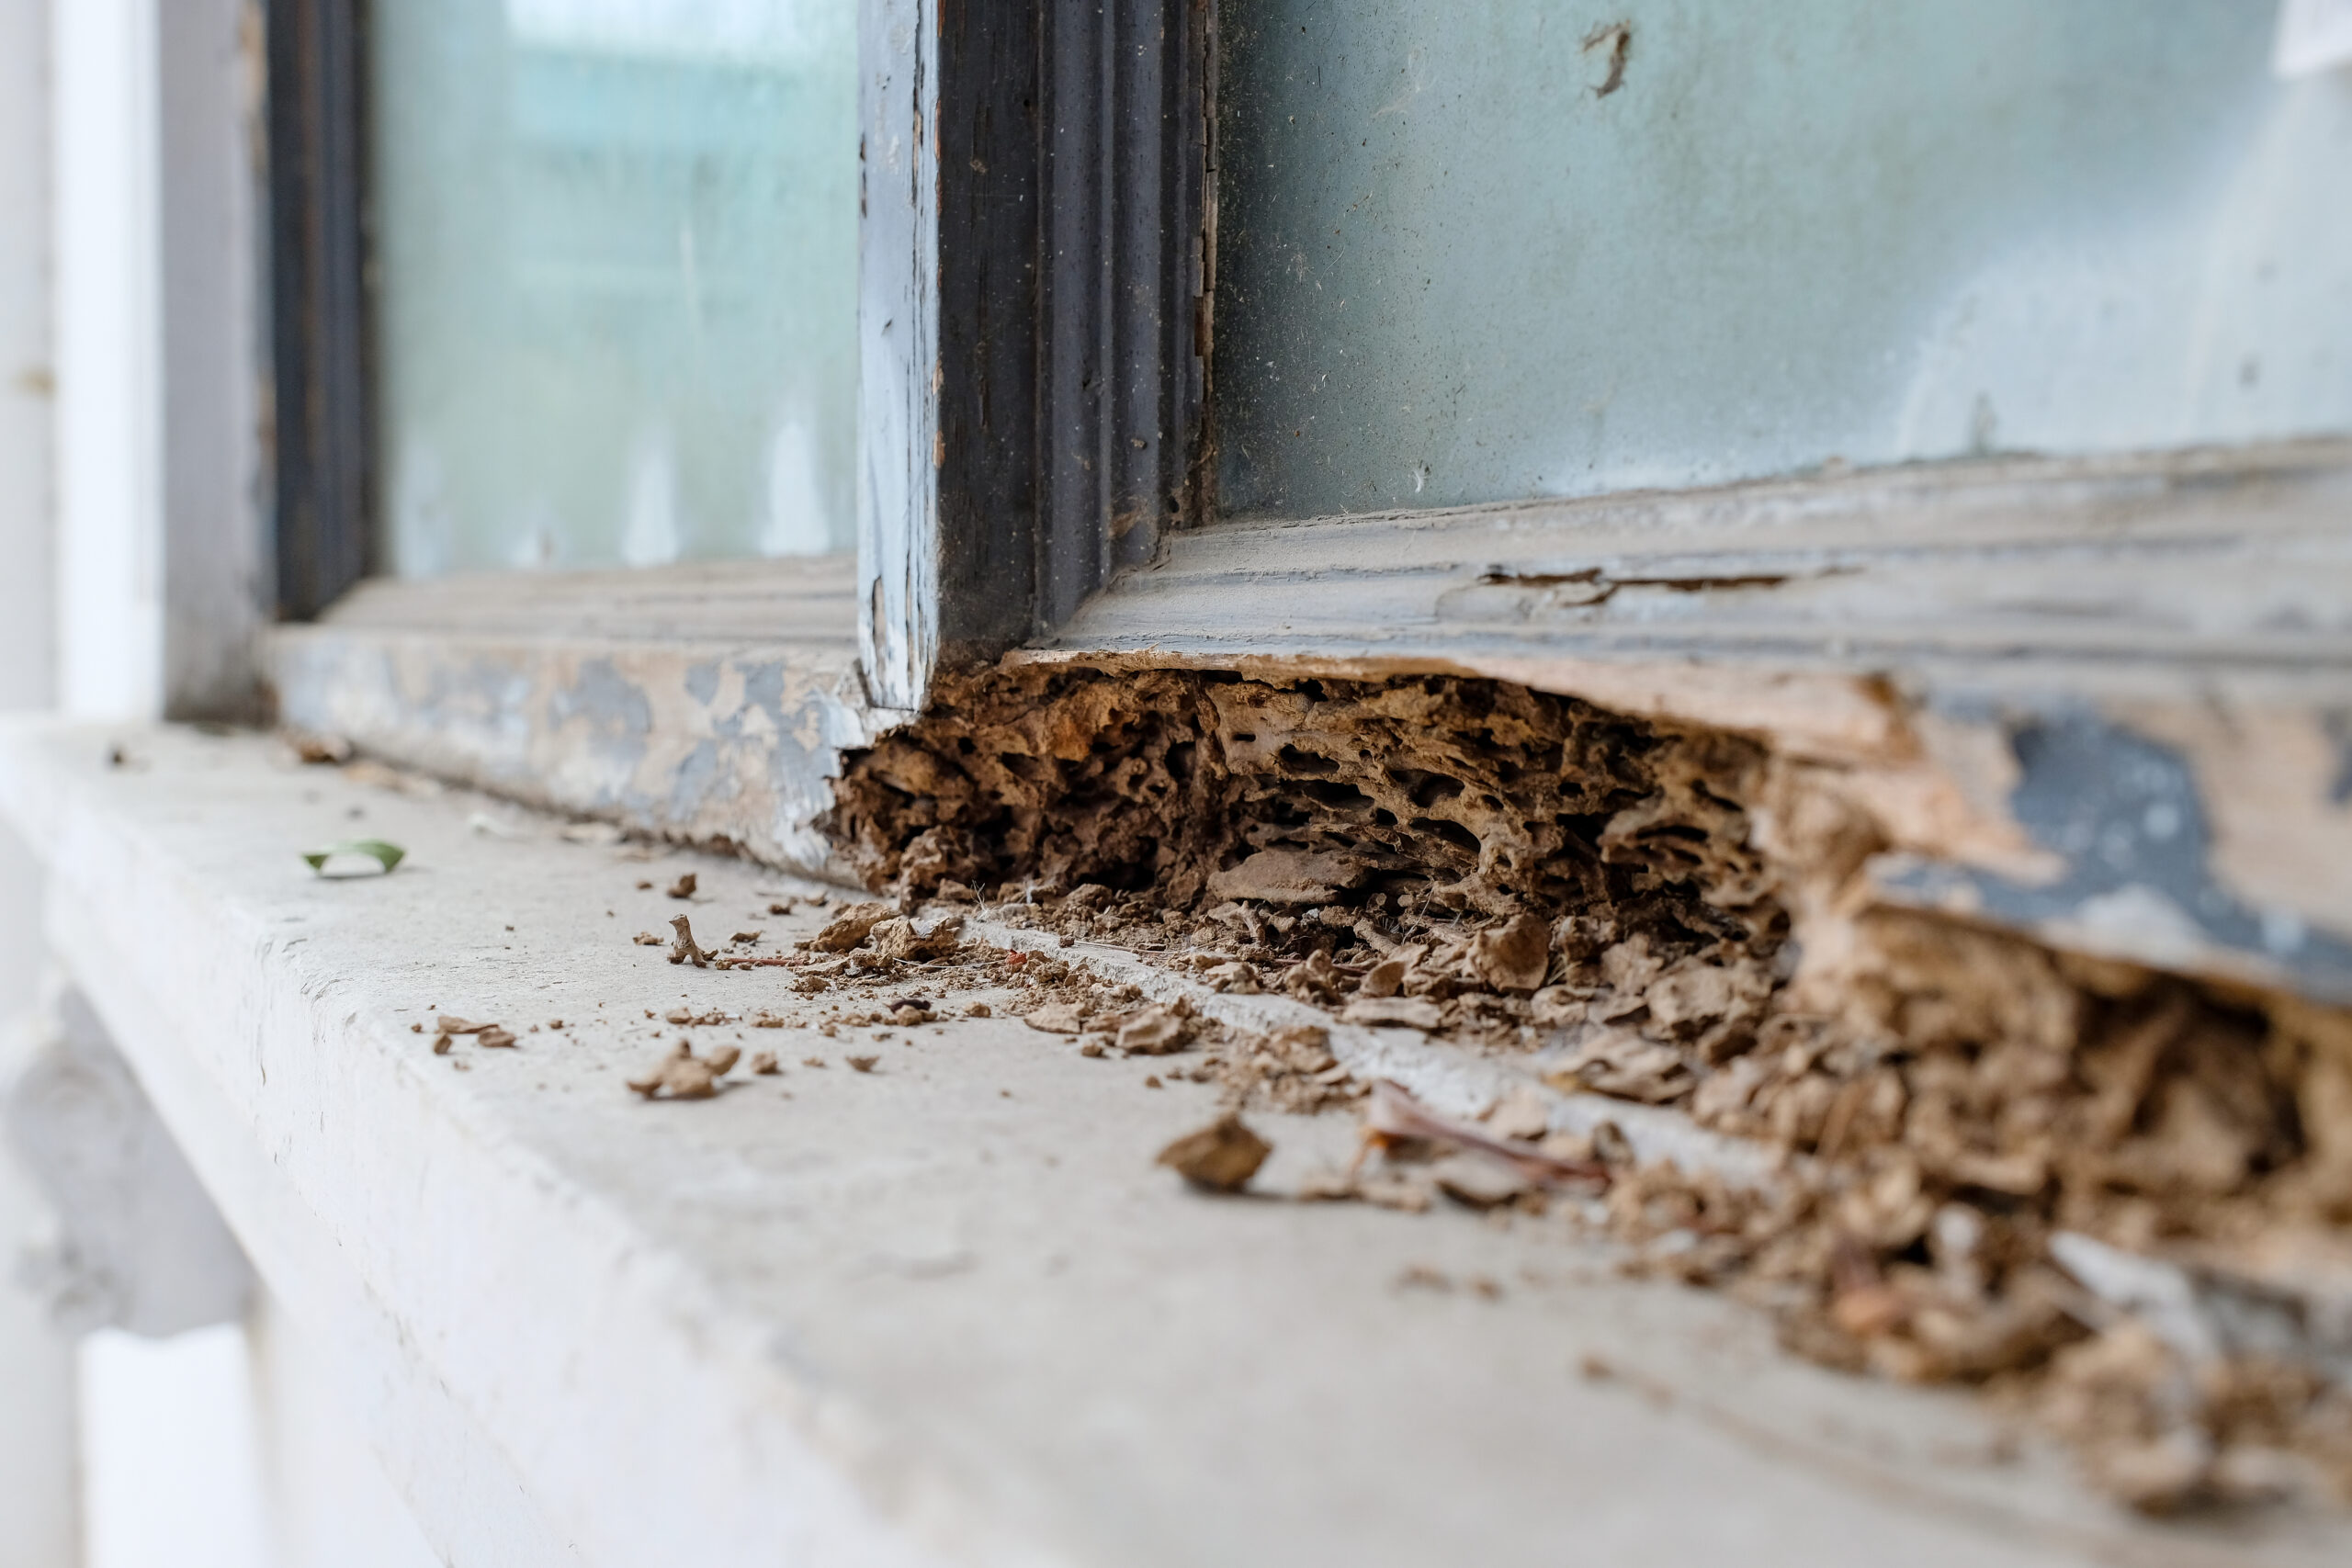 Timber Pest Inspections